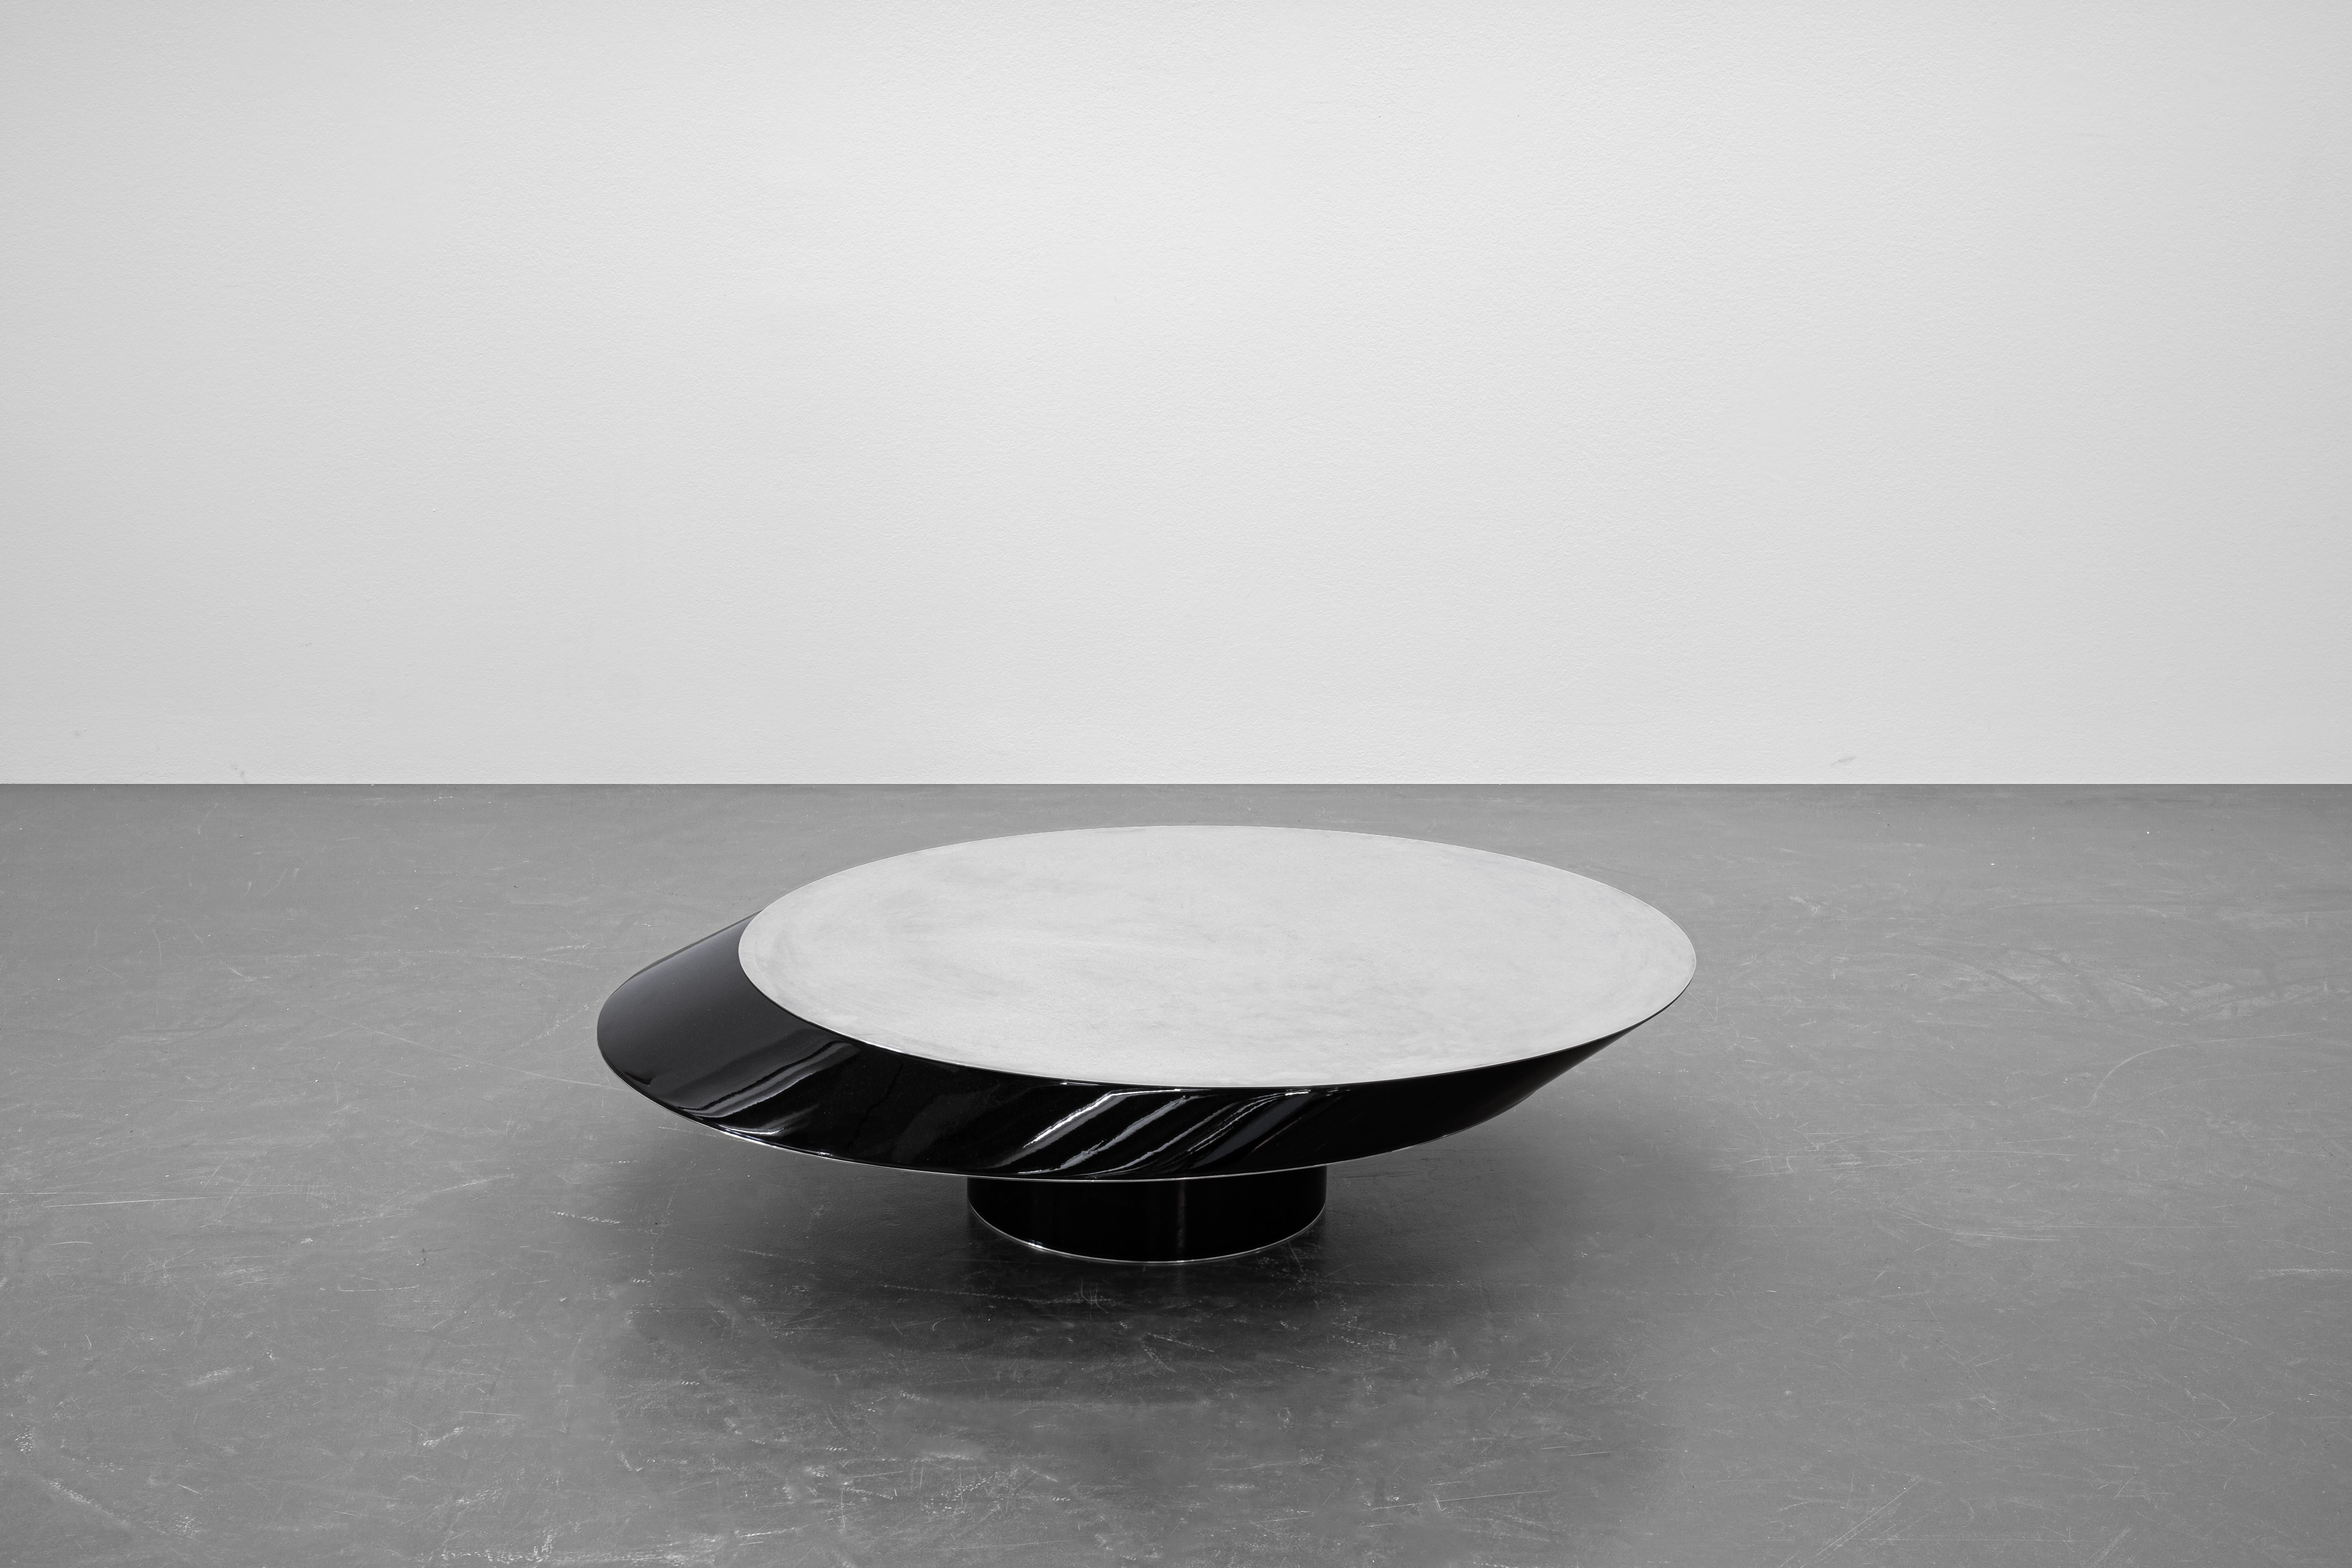 Object 2 marble table coffee table by Emelianova Studio
Distortion series Vol 1 
Limited edition of 20 
Signed and numbered
Dimensions: 120 × 95 × 30 cm
Materials: Silver plated, hand patinated brass, black lacquered